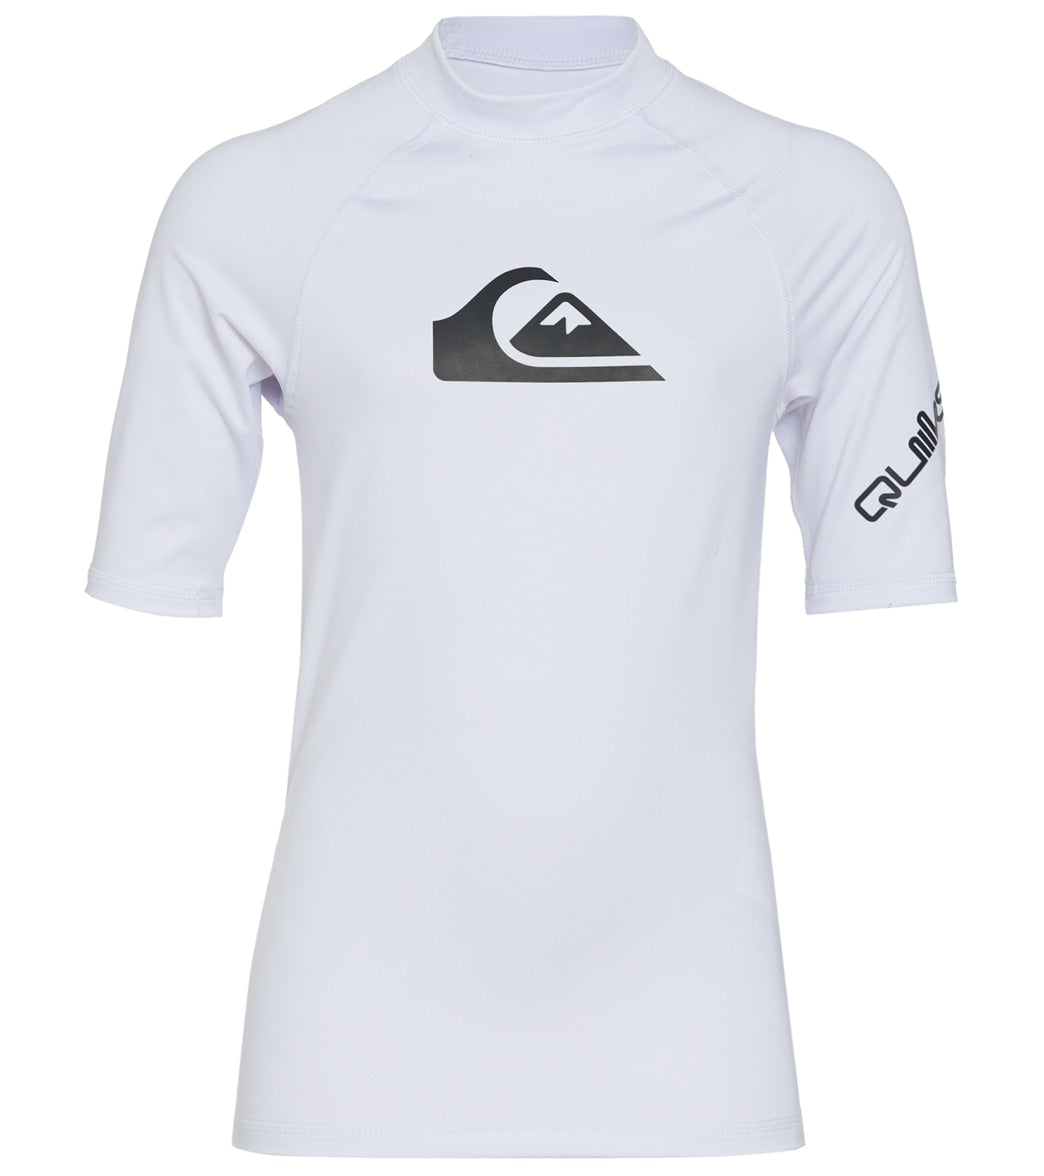 Quiksilver Youth All Time Short Sleeve UPF 50 Rash Guard